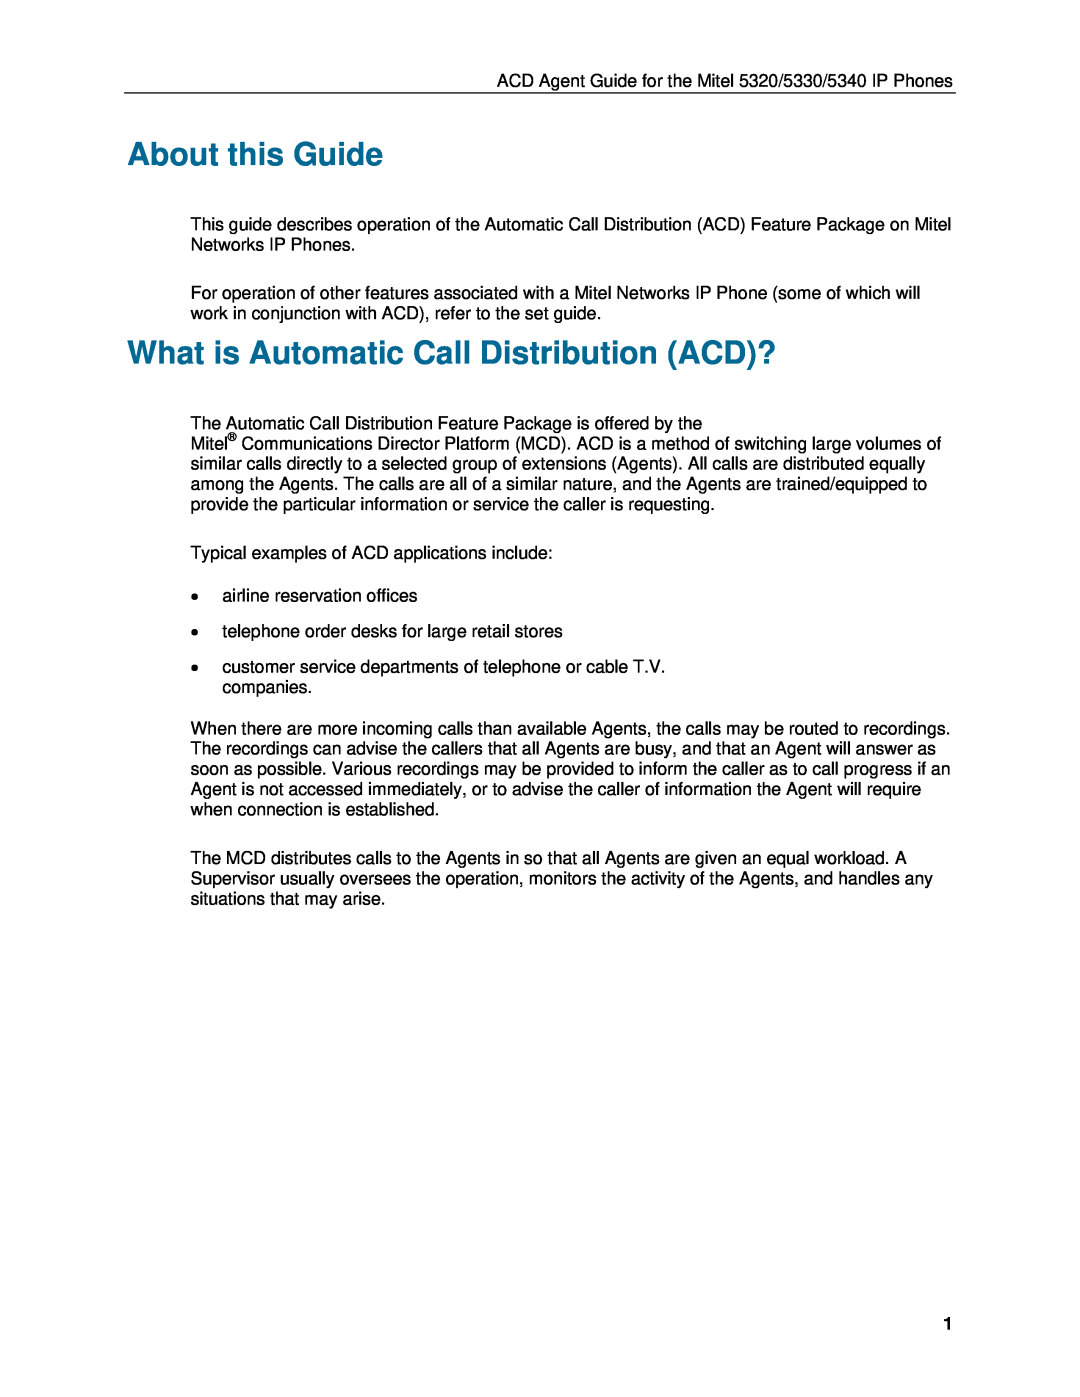 Mitel 5330, 5340, 5320 manual About this Guide, What is Automatic Call Distribution ACD? 